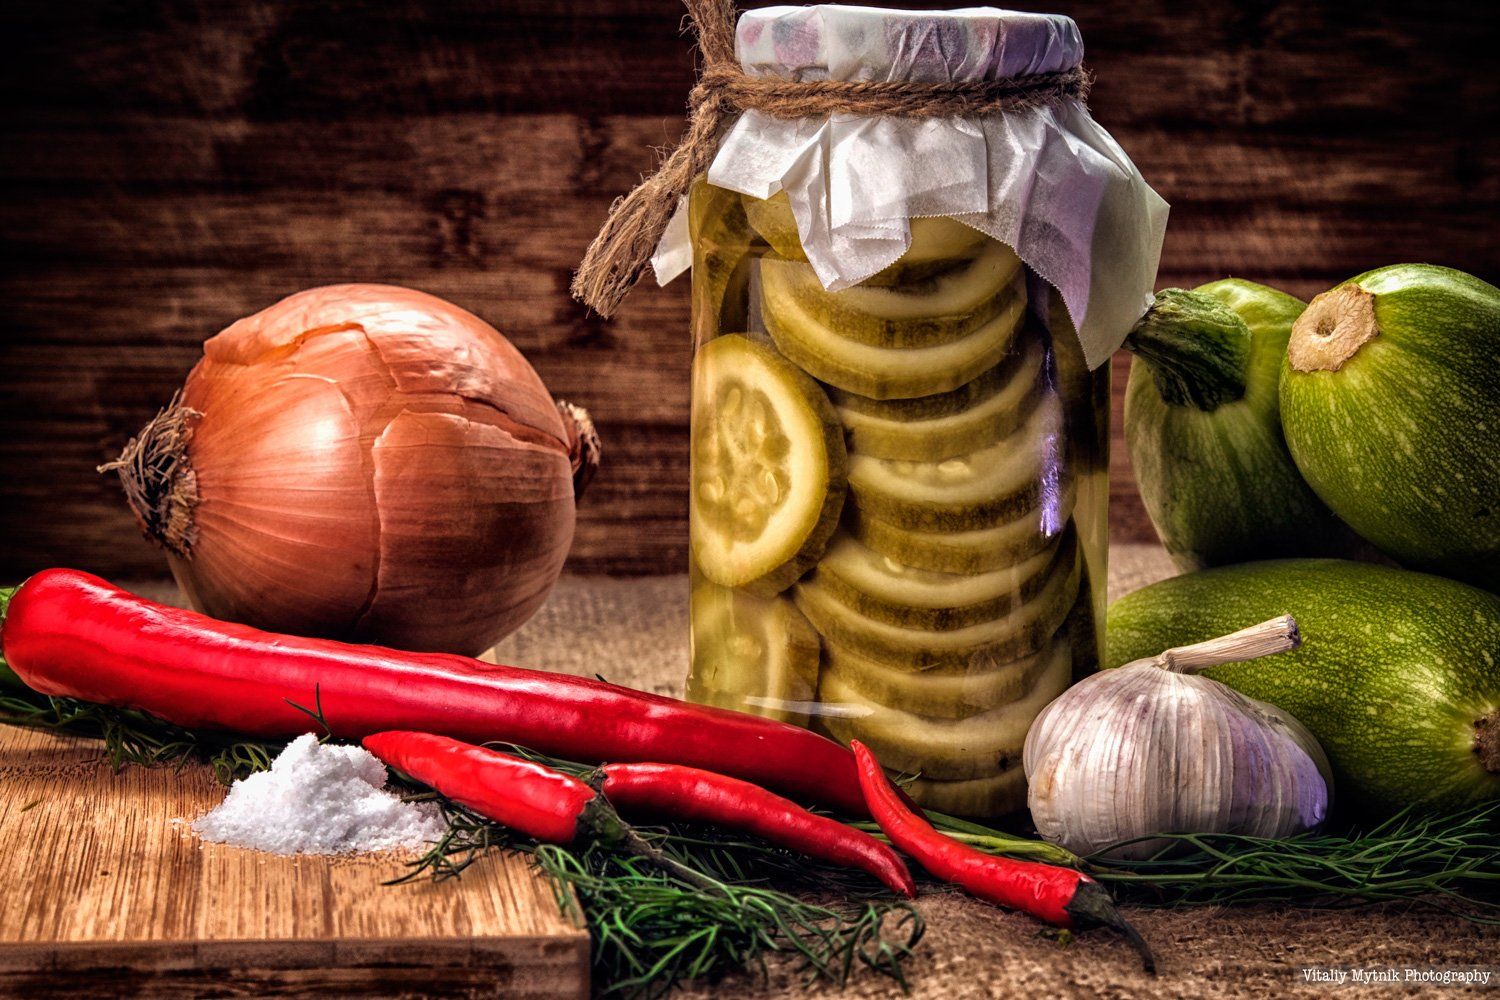 vegetable, glass, vegetarian, organic, food, pickled, preserve, ingredient, canned, homemade, pepper, pickle, summer, tomato, wooden, canning, garlic, autumn, background, healthy, traditional, spice, kitchen, fresh, herb, snack, dill, red, harvest, table,, Виталий Мытник